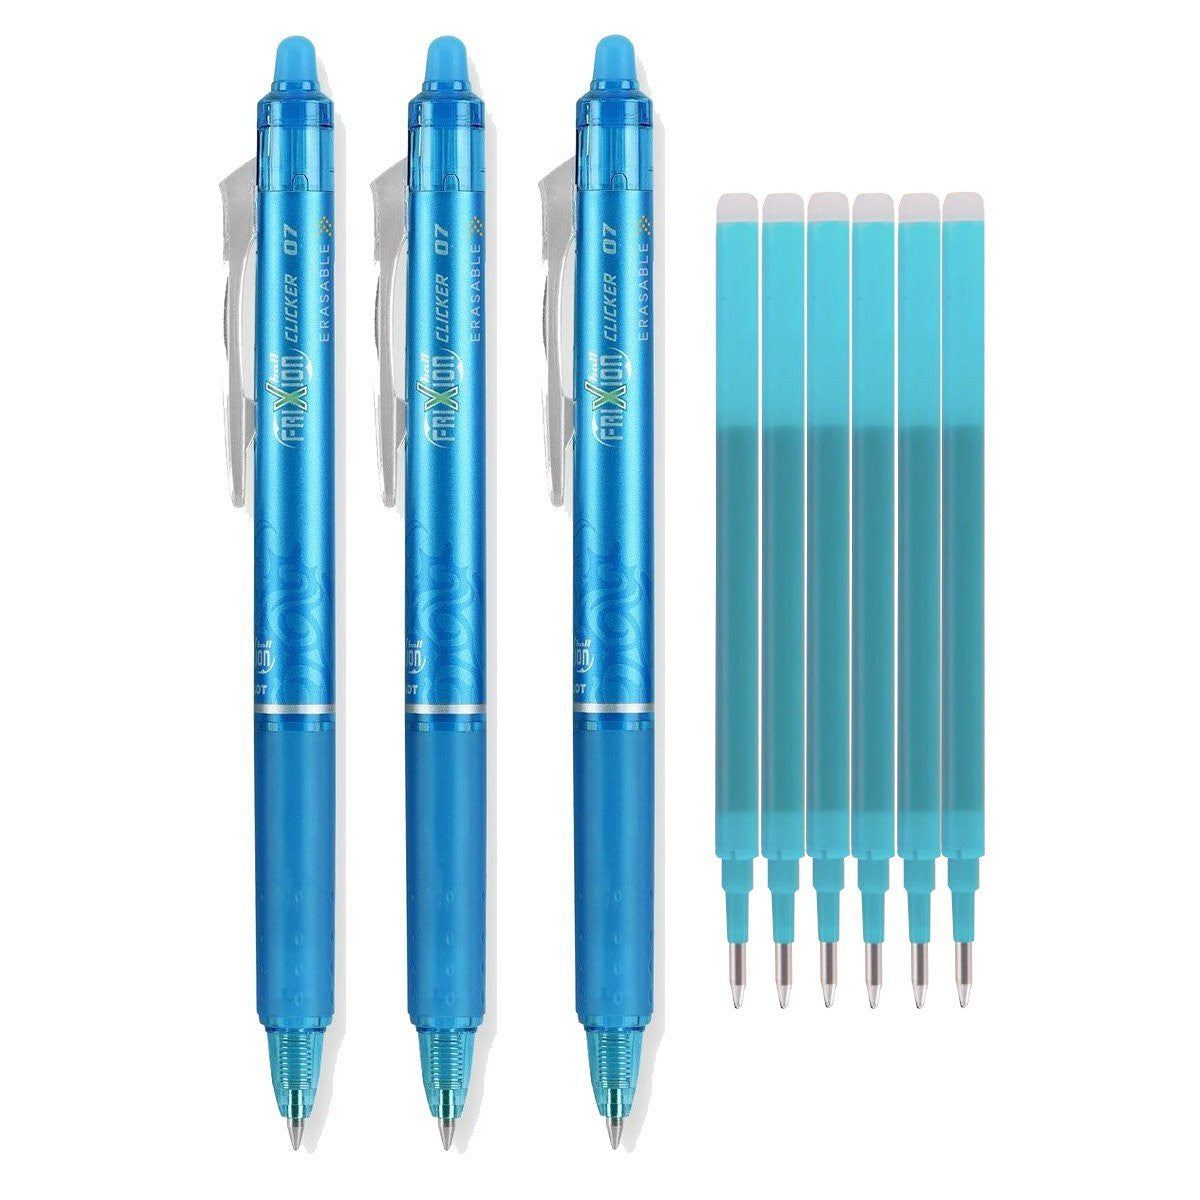 Buy Pilot Frixion Clicker Erasable Fine Blue (Pack of 3) at Mighty